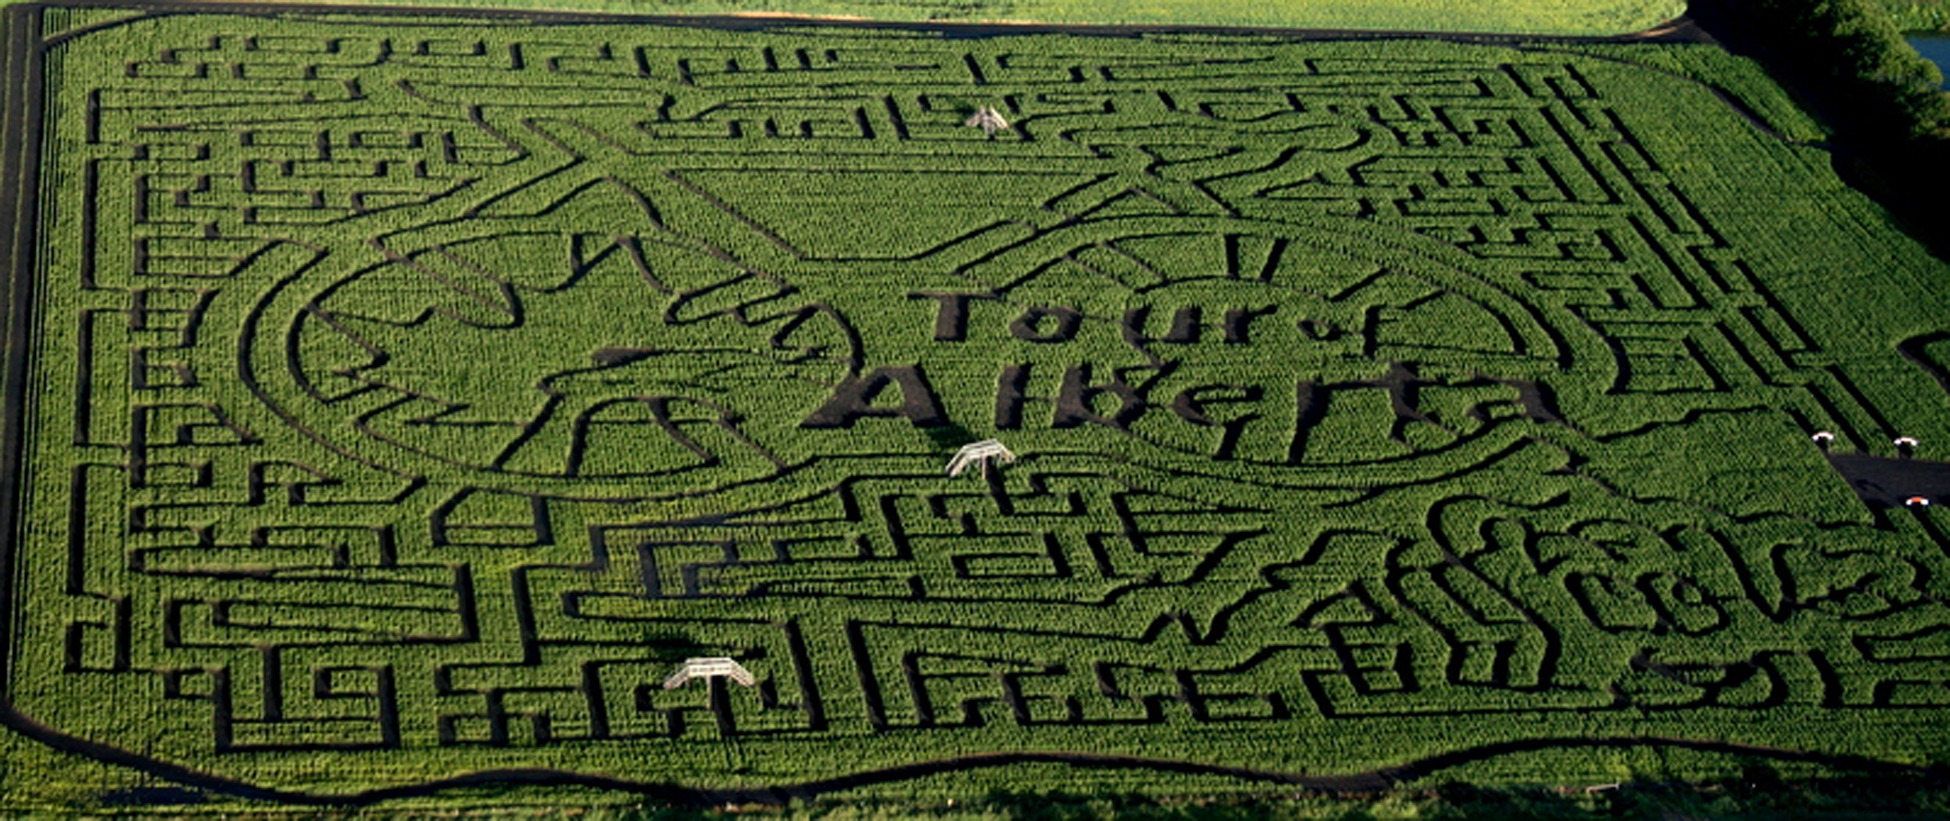 CORN-TASTIC - The Lacombe Corn Maze has been done in recognition of the Tour of Alberta which is set to take place next month. The second stage of the race will come through Red Deer on Sept. 5.